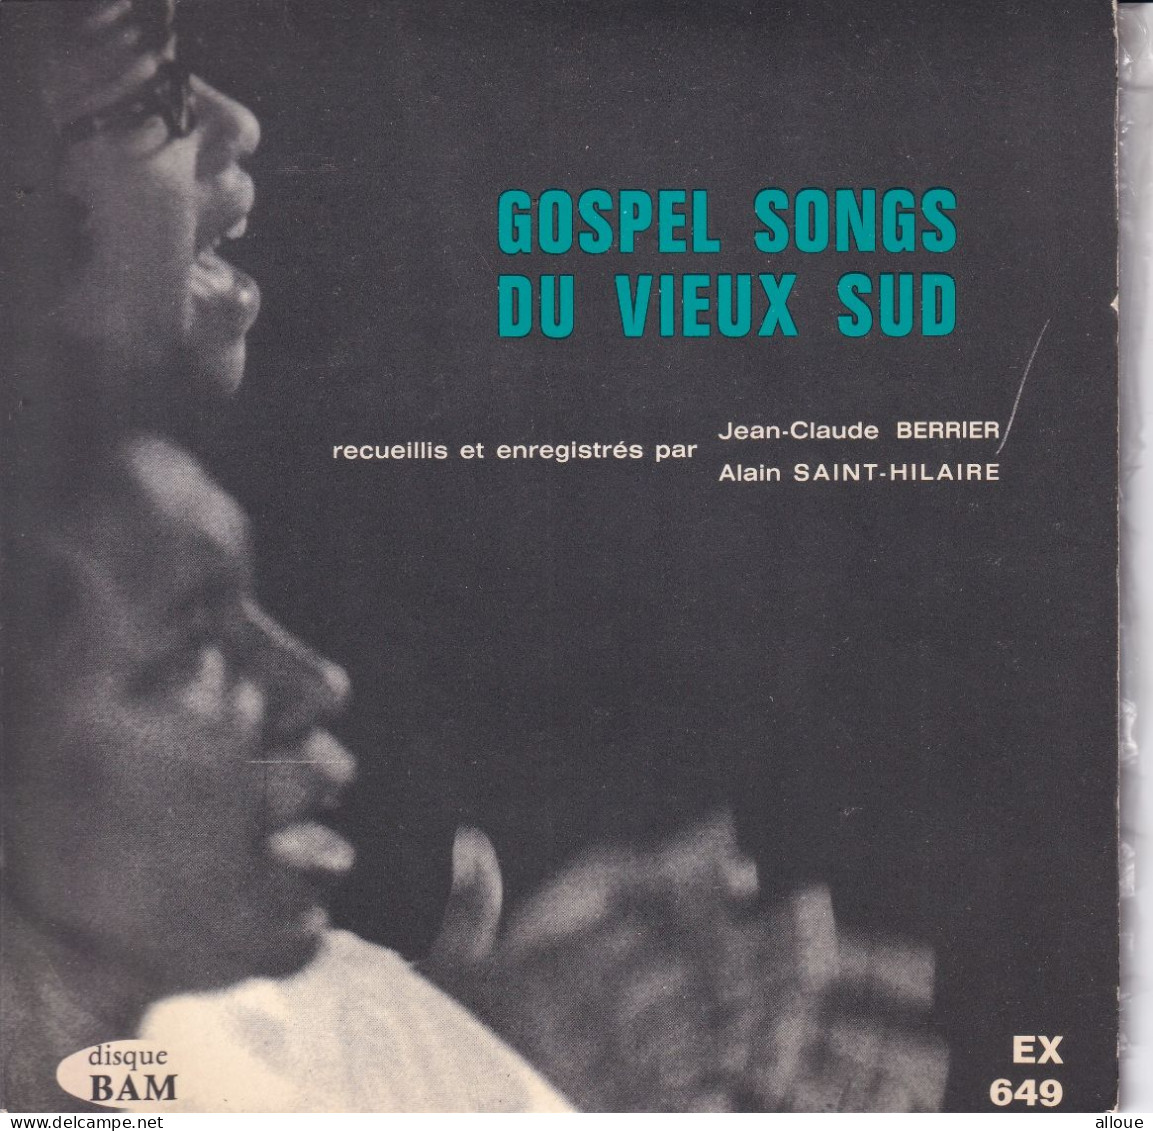 GOSPEL SONGS DU VIEUX SUD - FR EP - PREACHER, BROTHERS AND SISTERS OF THE CONGREGATION SINGING GOSPEL SONGS - Religion & Gospel